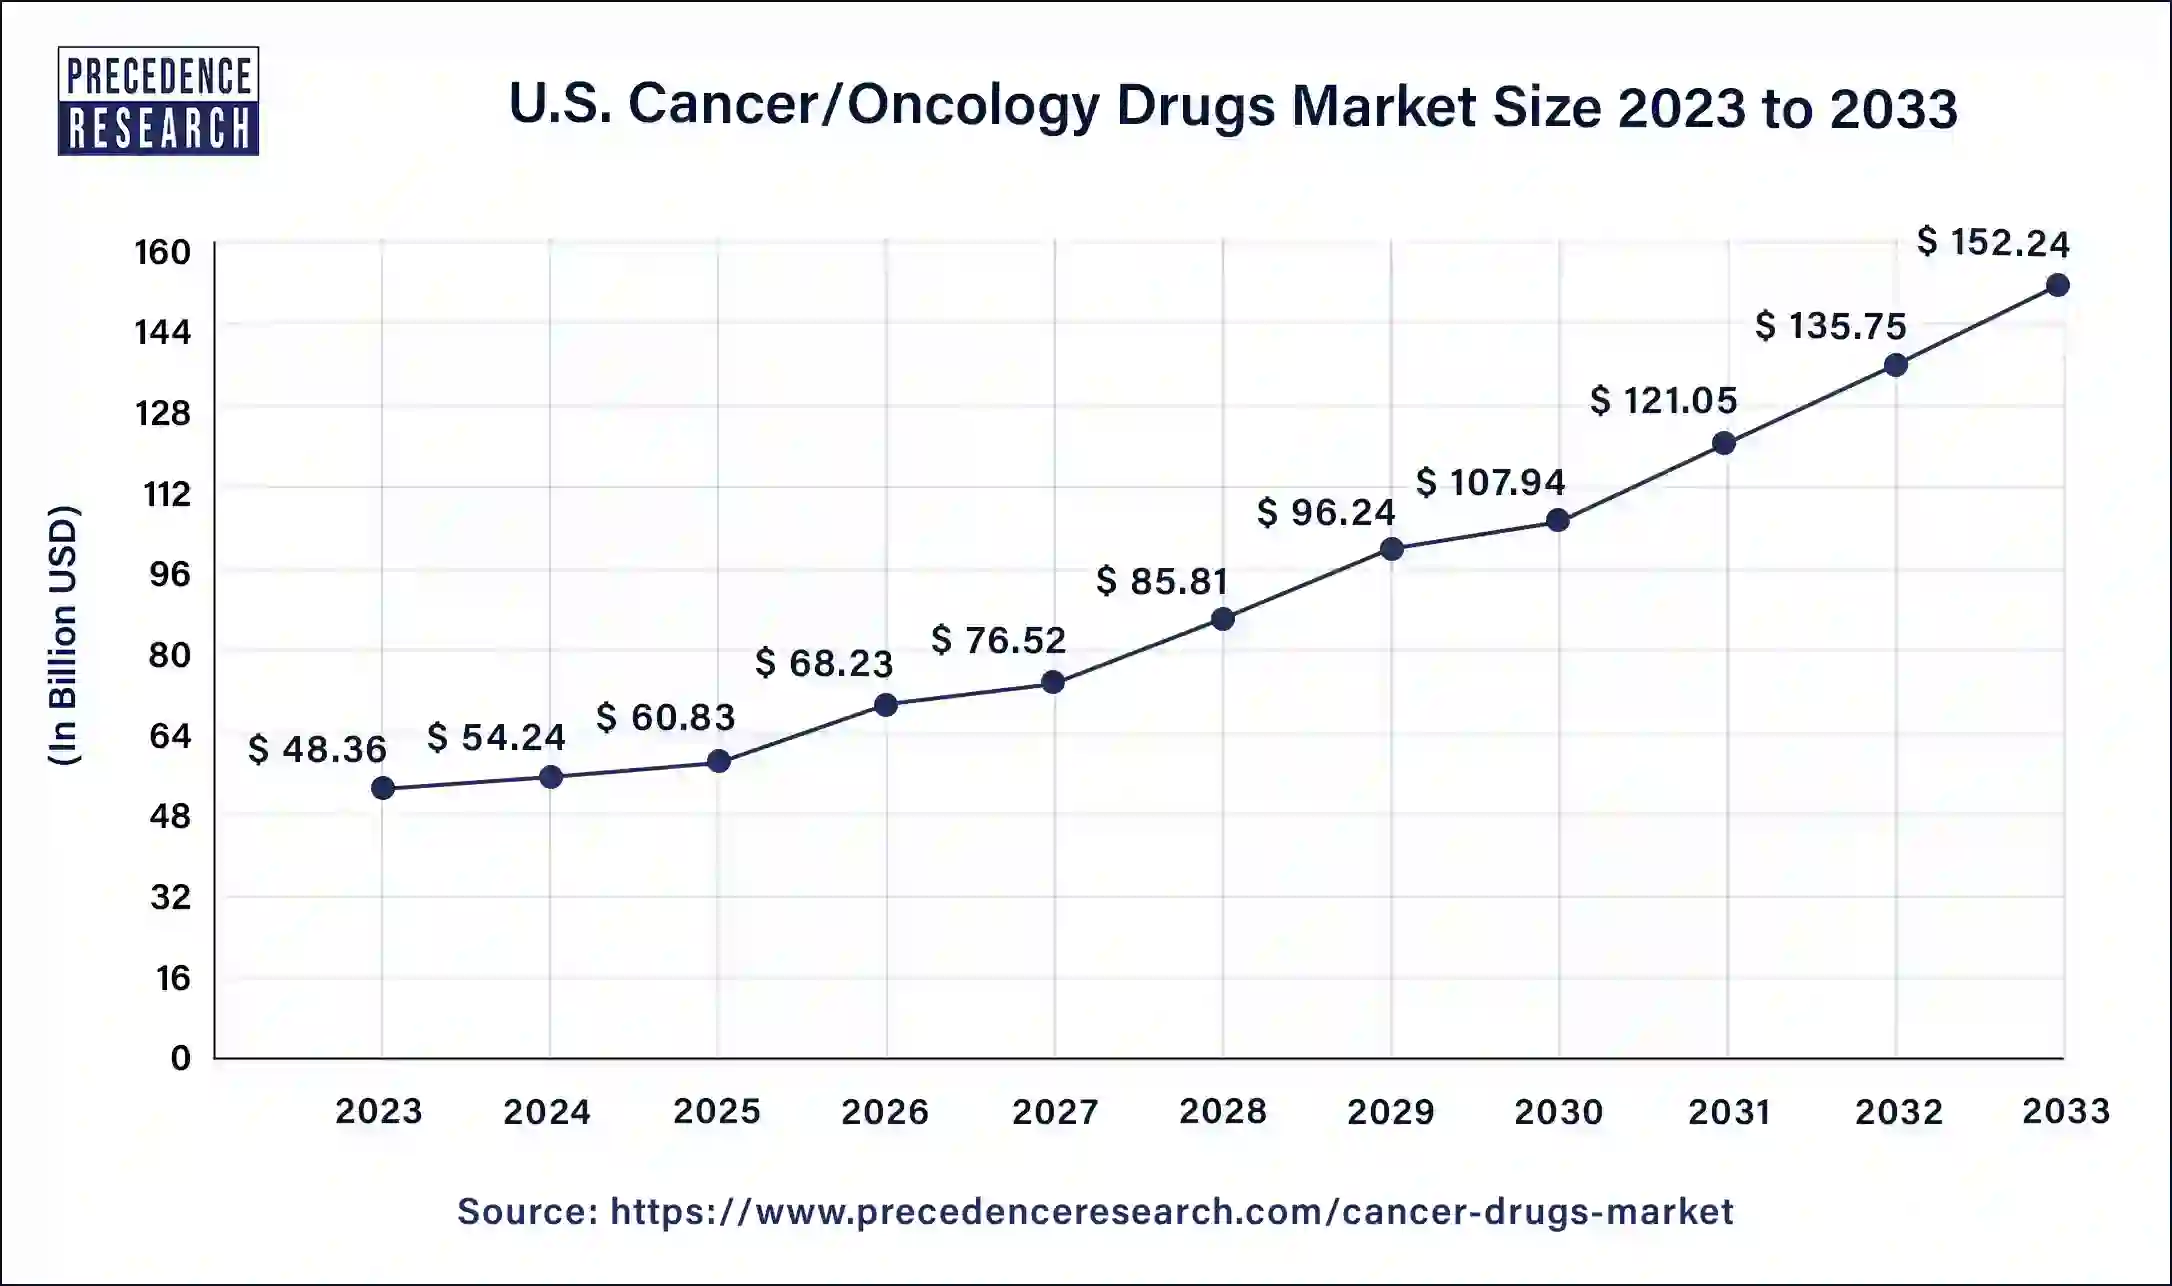 U.S. Cancer/Oncology Drugs Market Size 2024 to 2033